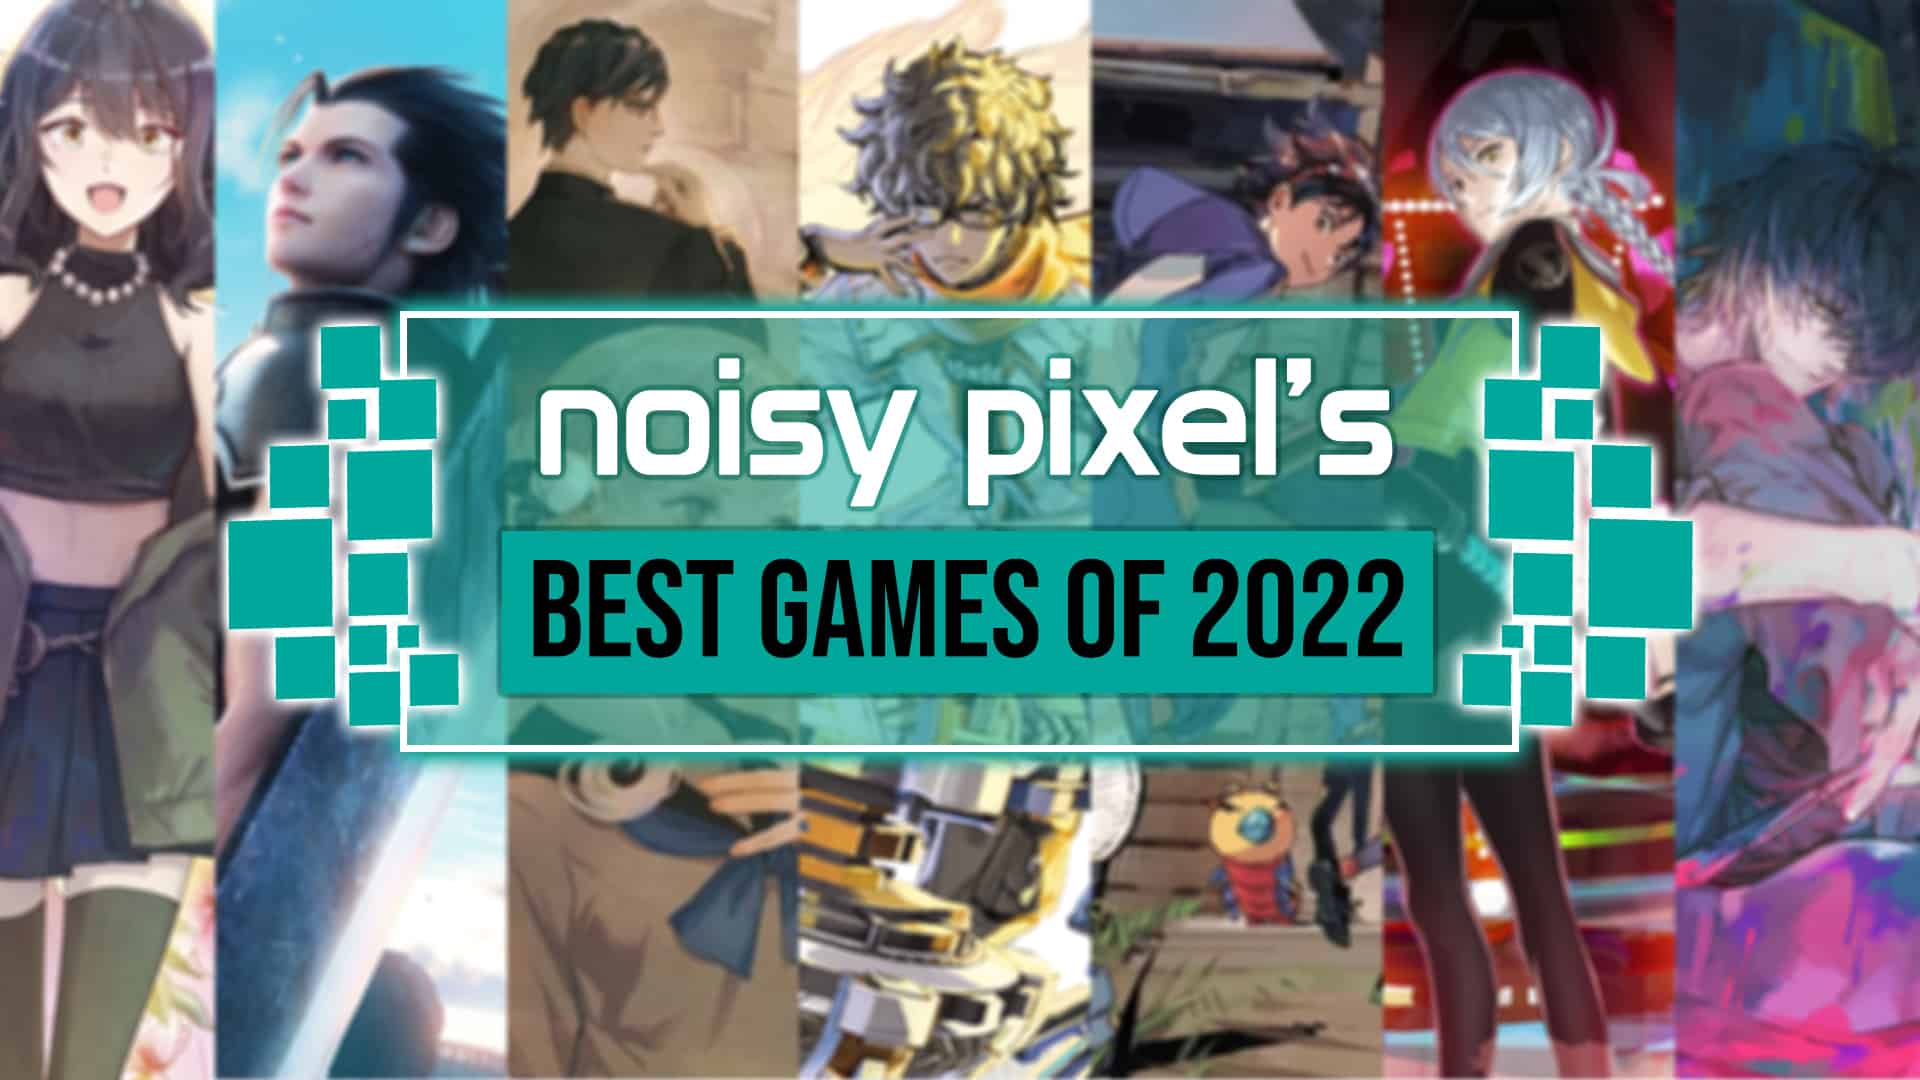 Noisy Pixel’s Best Games of 2022 – All Categories and Reader’s Choice